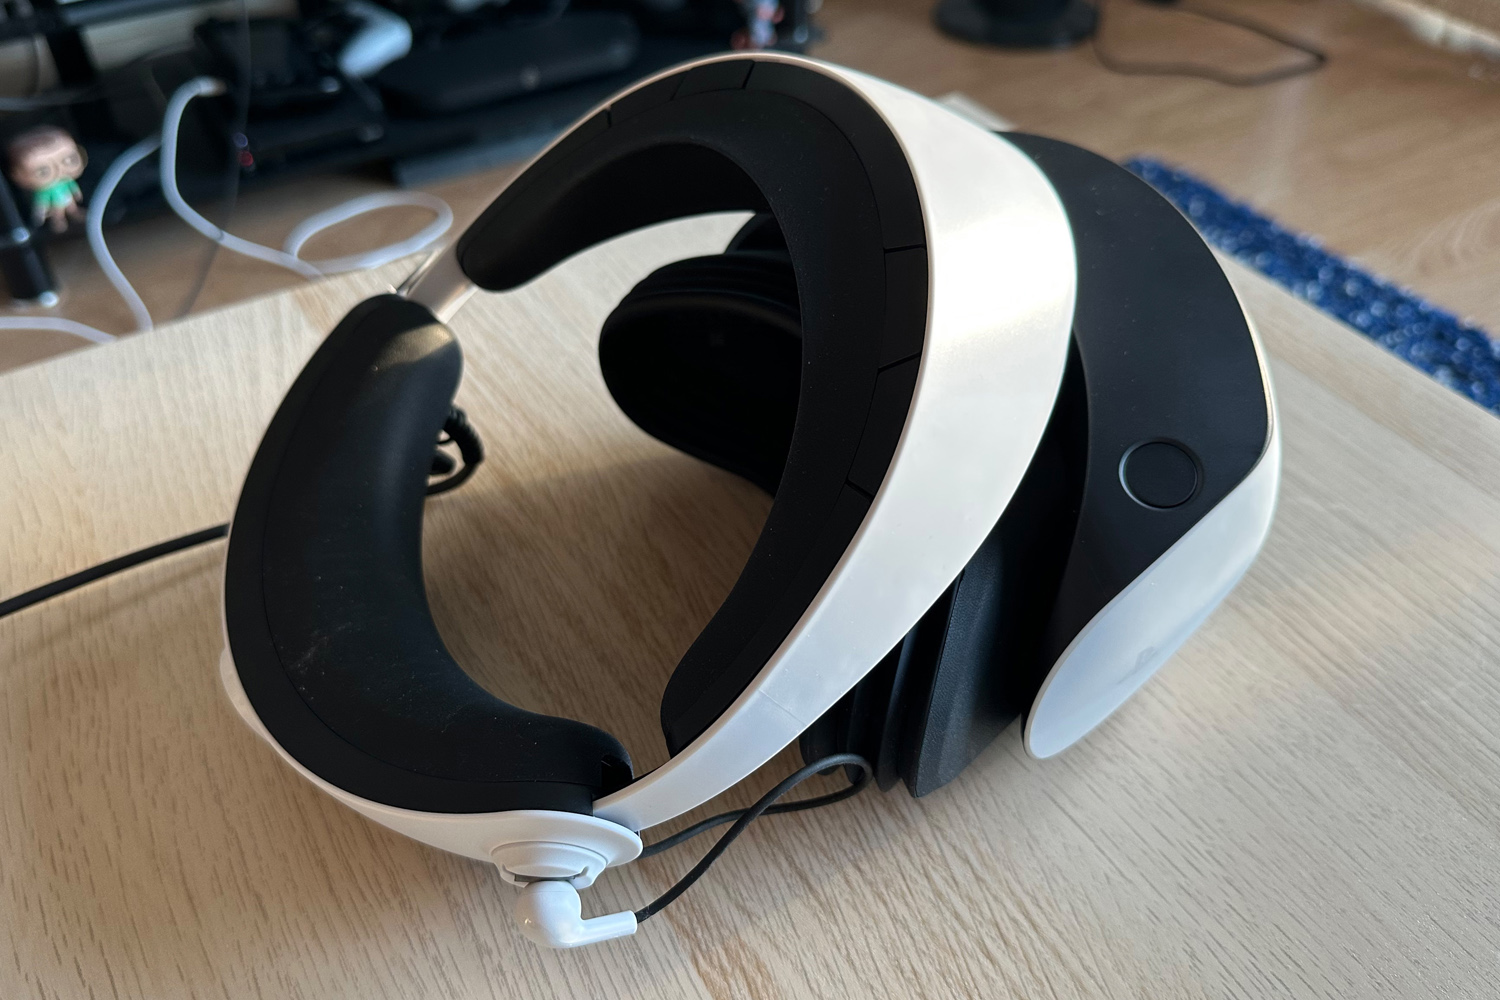 PlayStation VR 2 review: True next-gen VR for a high price